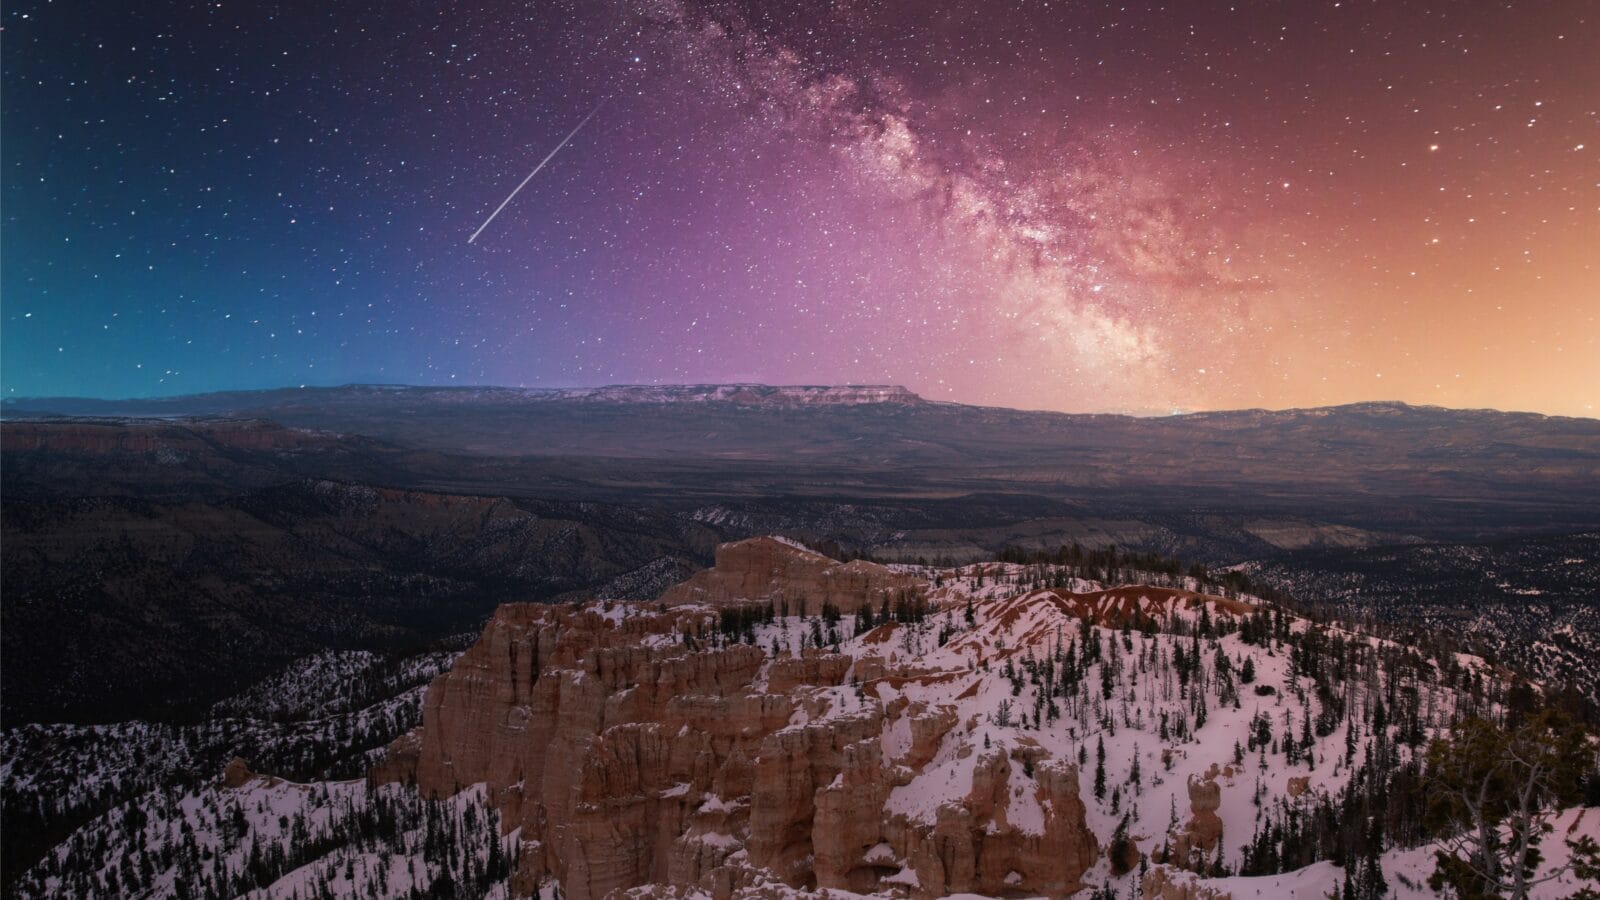 <p>Bryce Canyon National Park located in Utah, USA is one of the best places to see the stars in the world. Utah itself has 24 designated dark sky locations that offer unobstructed views of the night sky. Thanks to the arid climate and high elevation, you are almost guaranteed to see billions of glowing orbs when you look up into the sky. Look for some of the regular stargazing events then start planning your trip! </p>